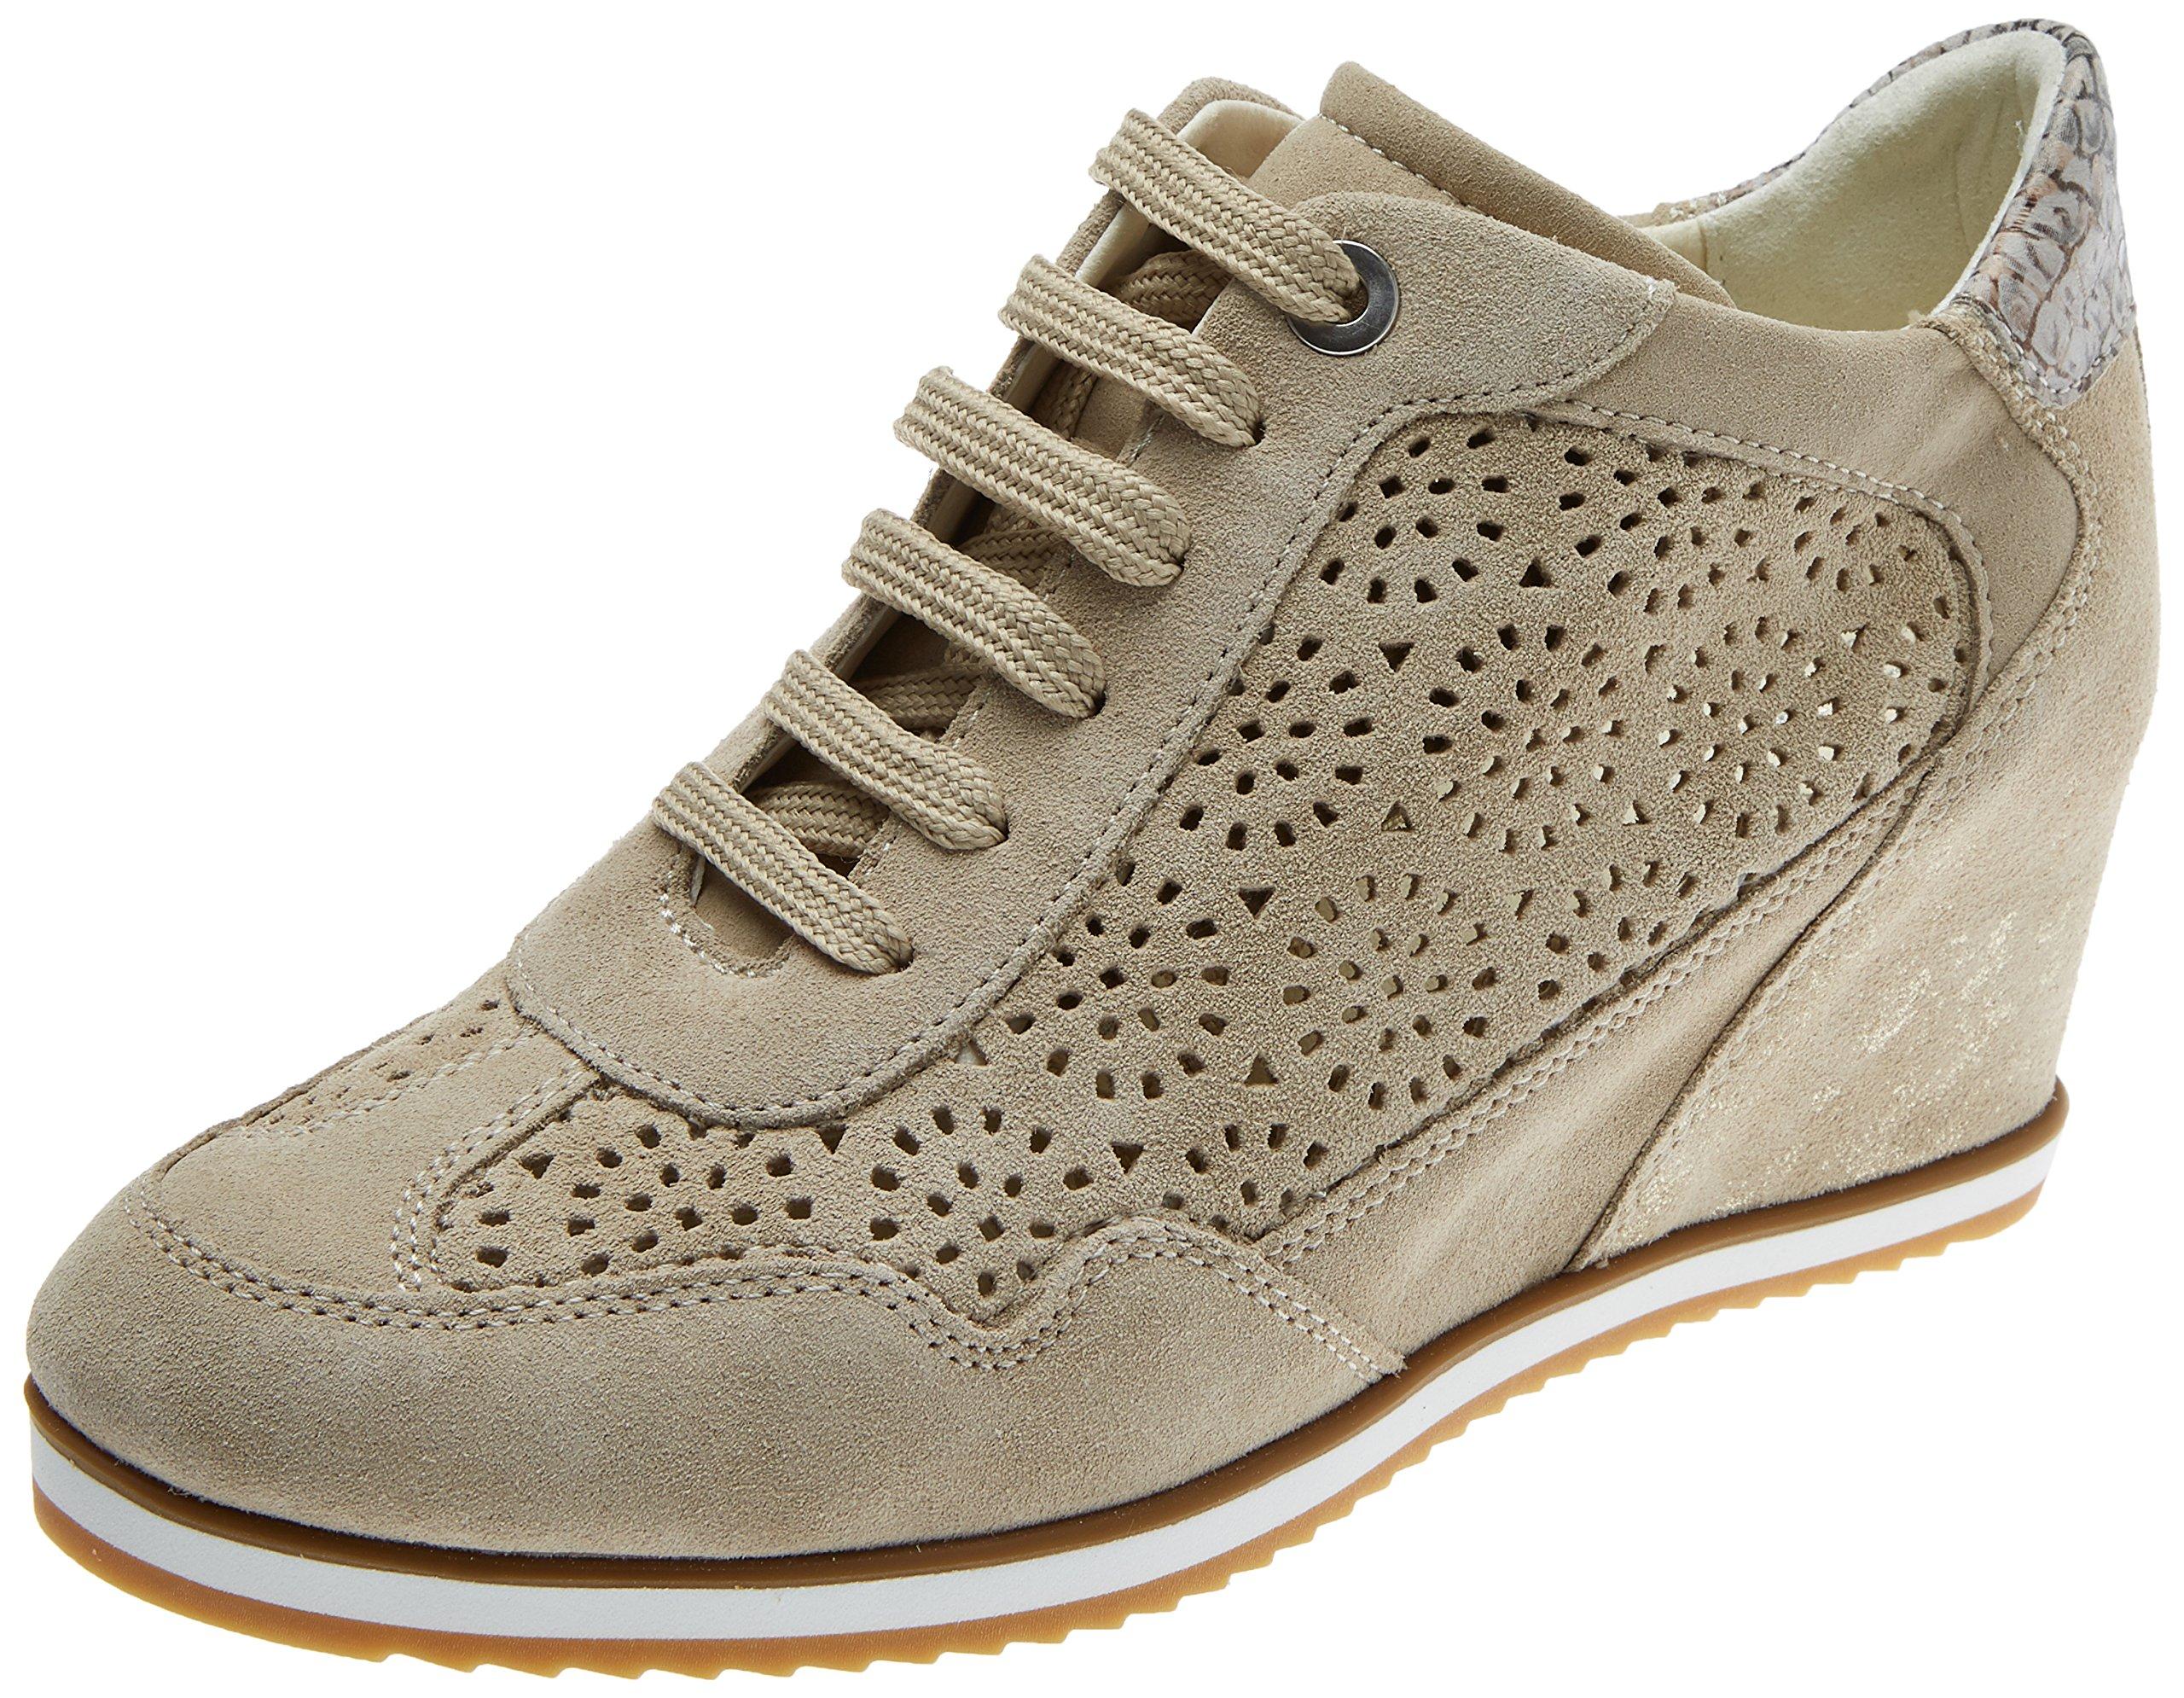 Geox D Illusion B Trainers in Natural | Lyst UK